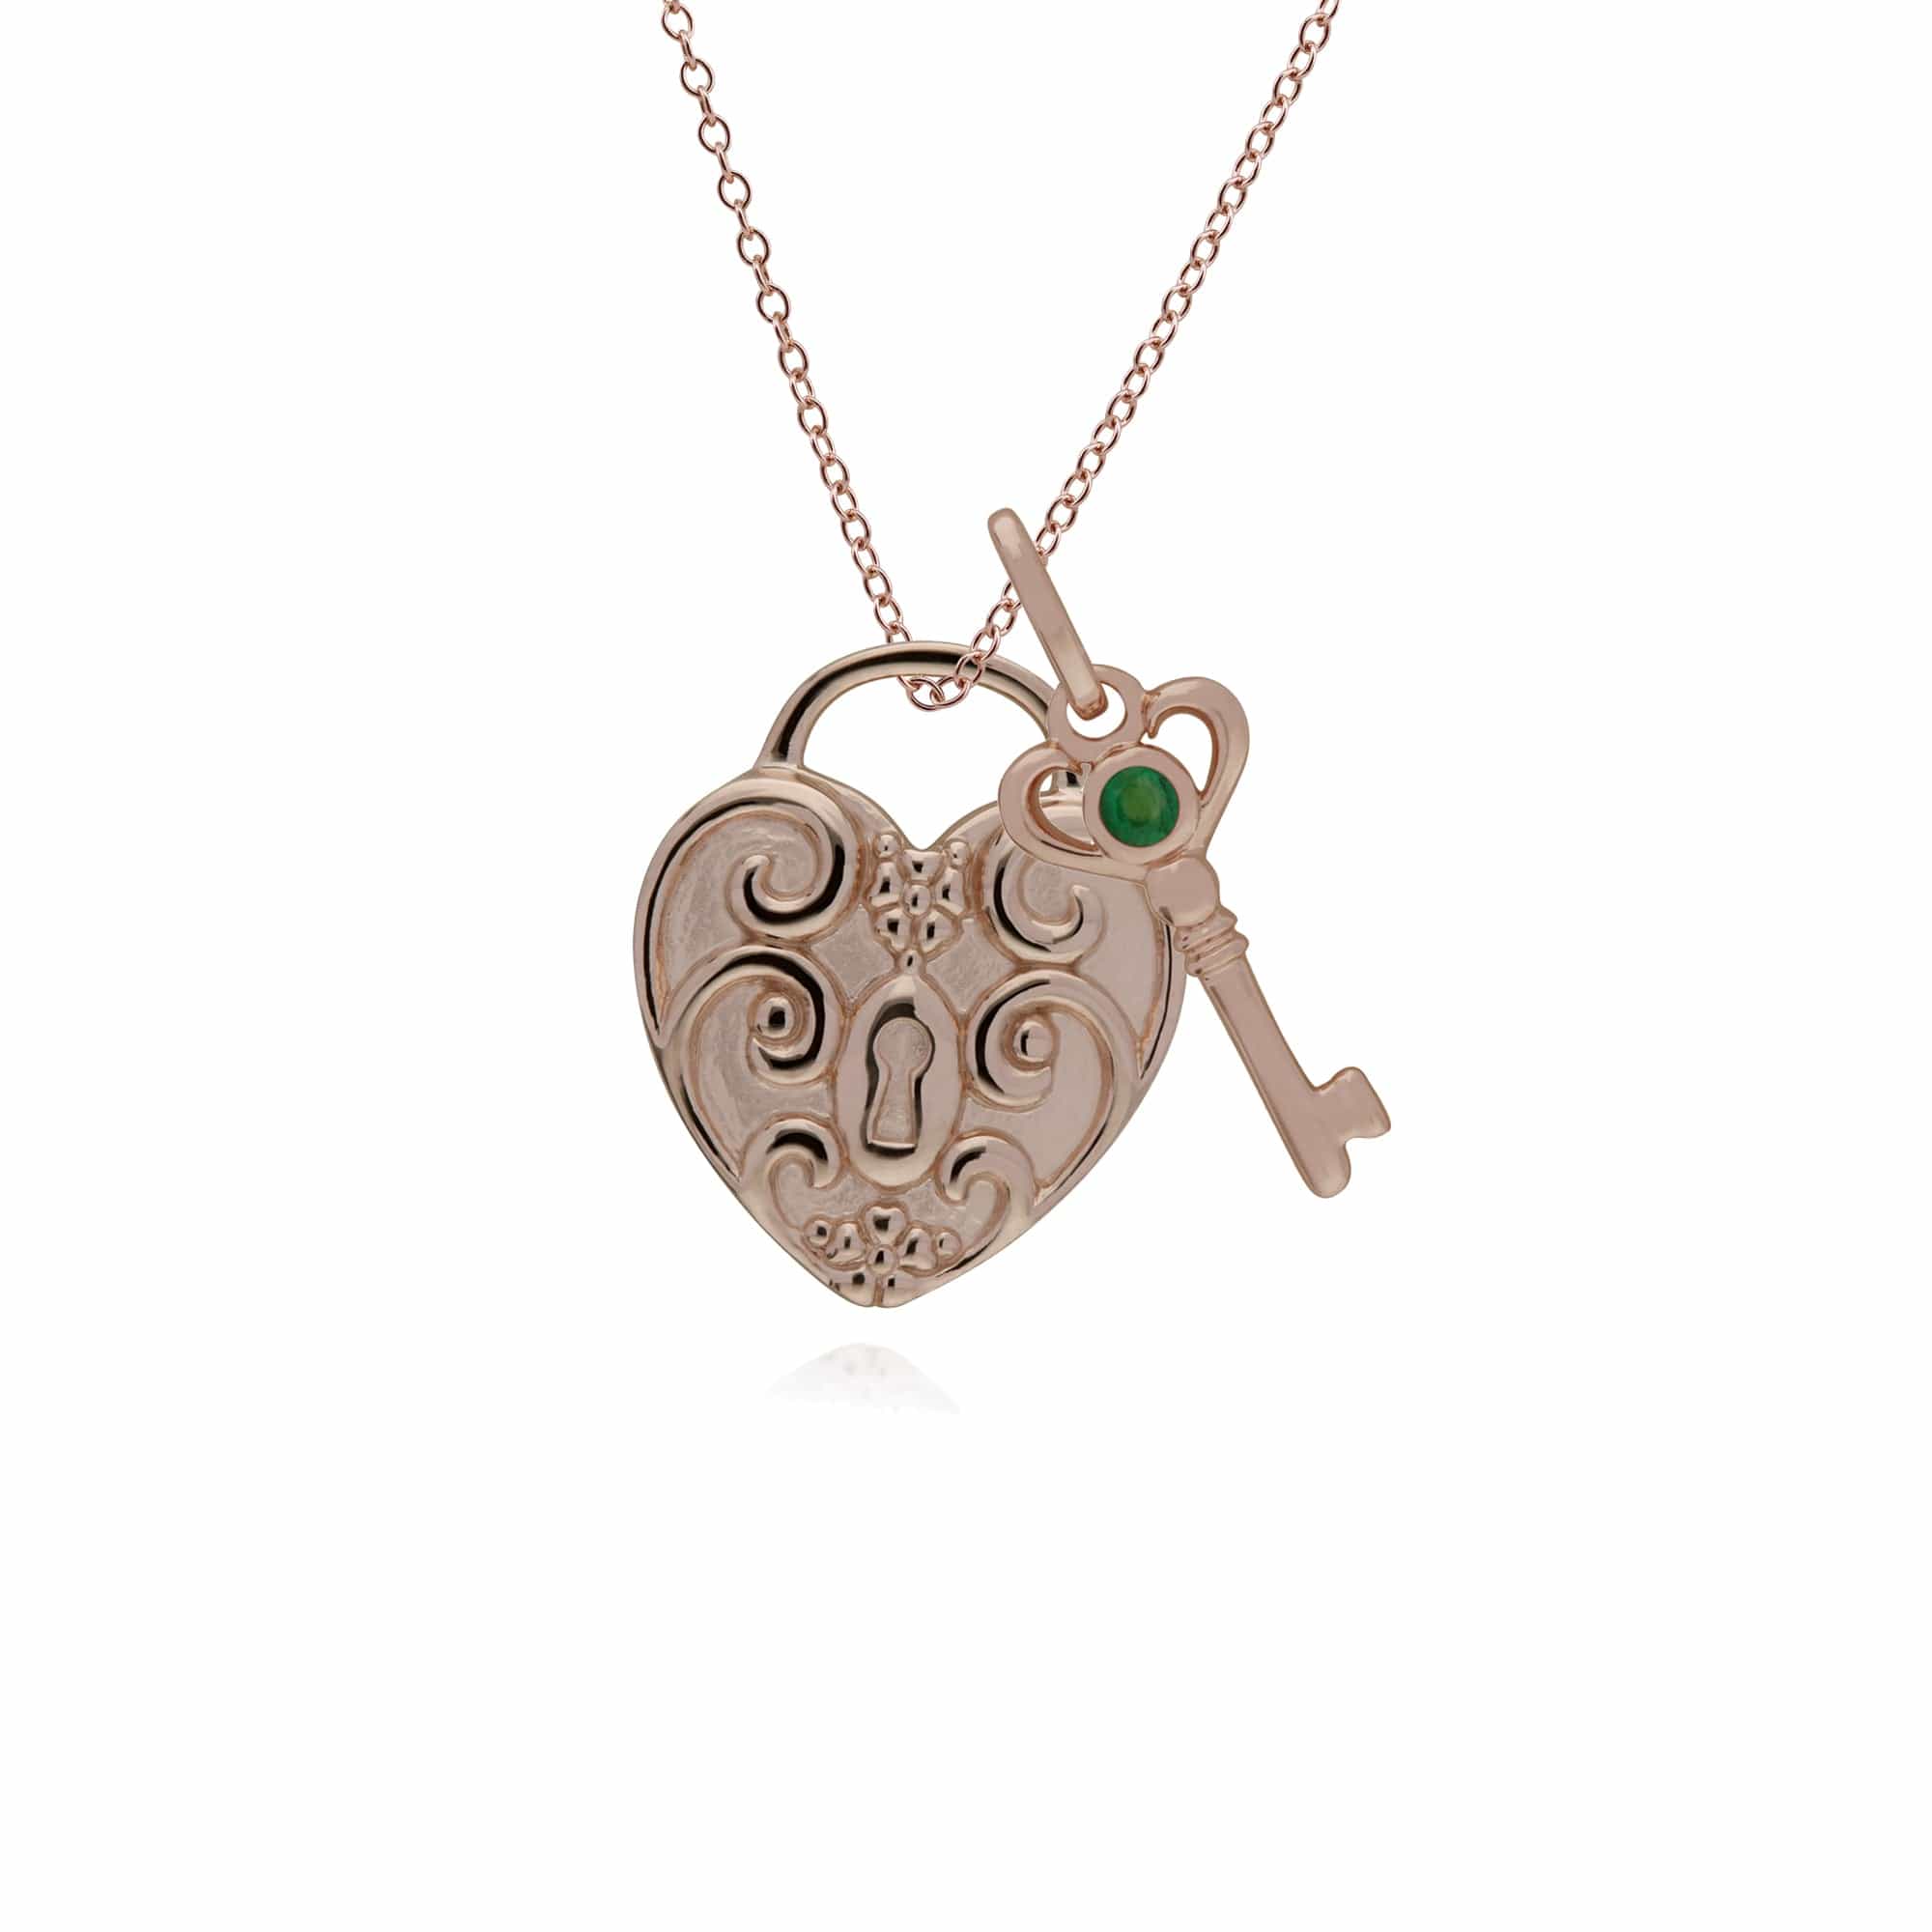 270P026303925-270P026501925 Classic Swirl Heart Lock Pendant & Emerald Key Charm in Rose Gold Plated 925 Sterling Silver 1